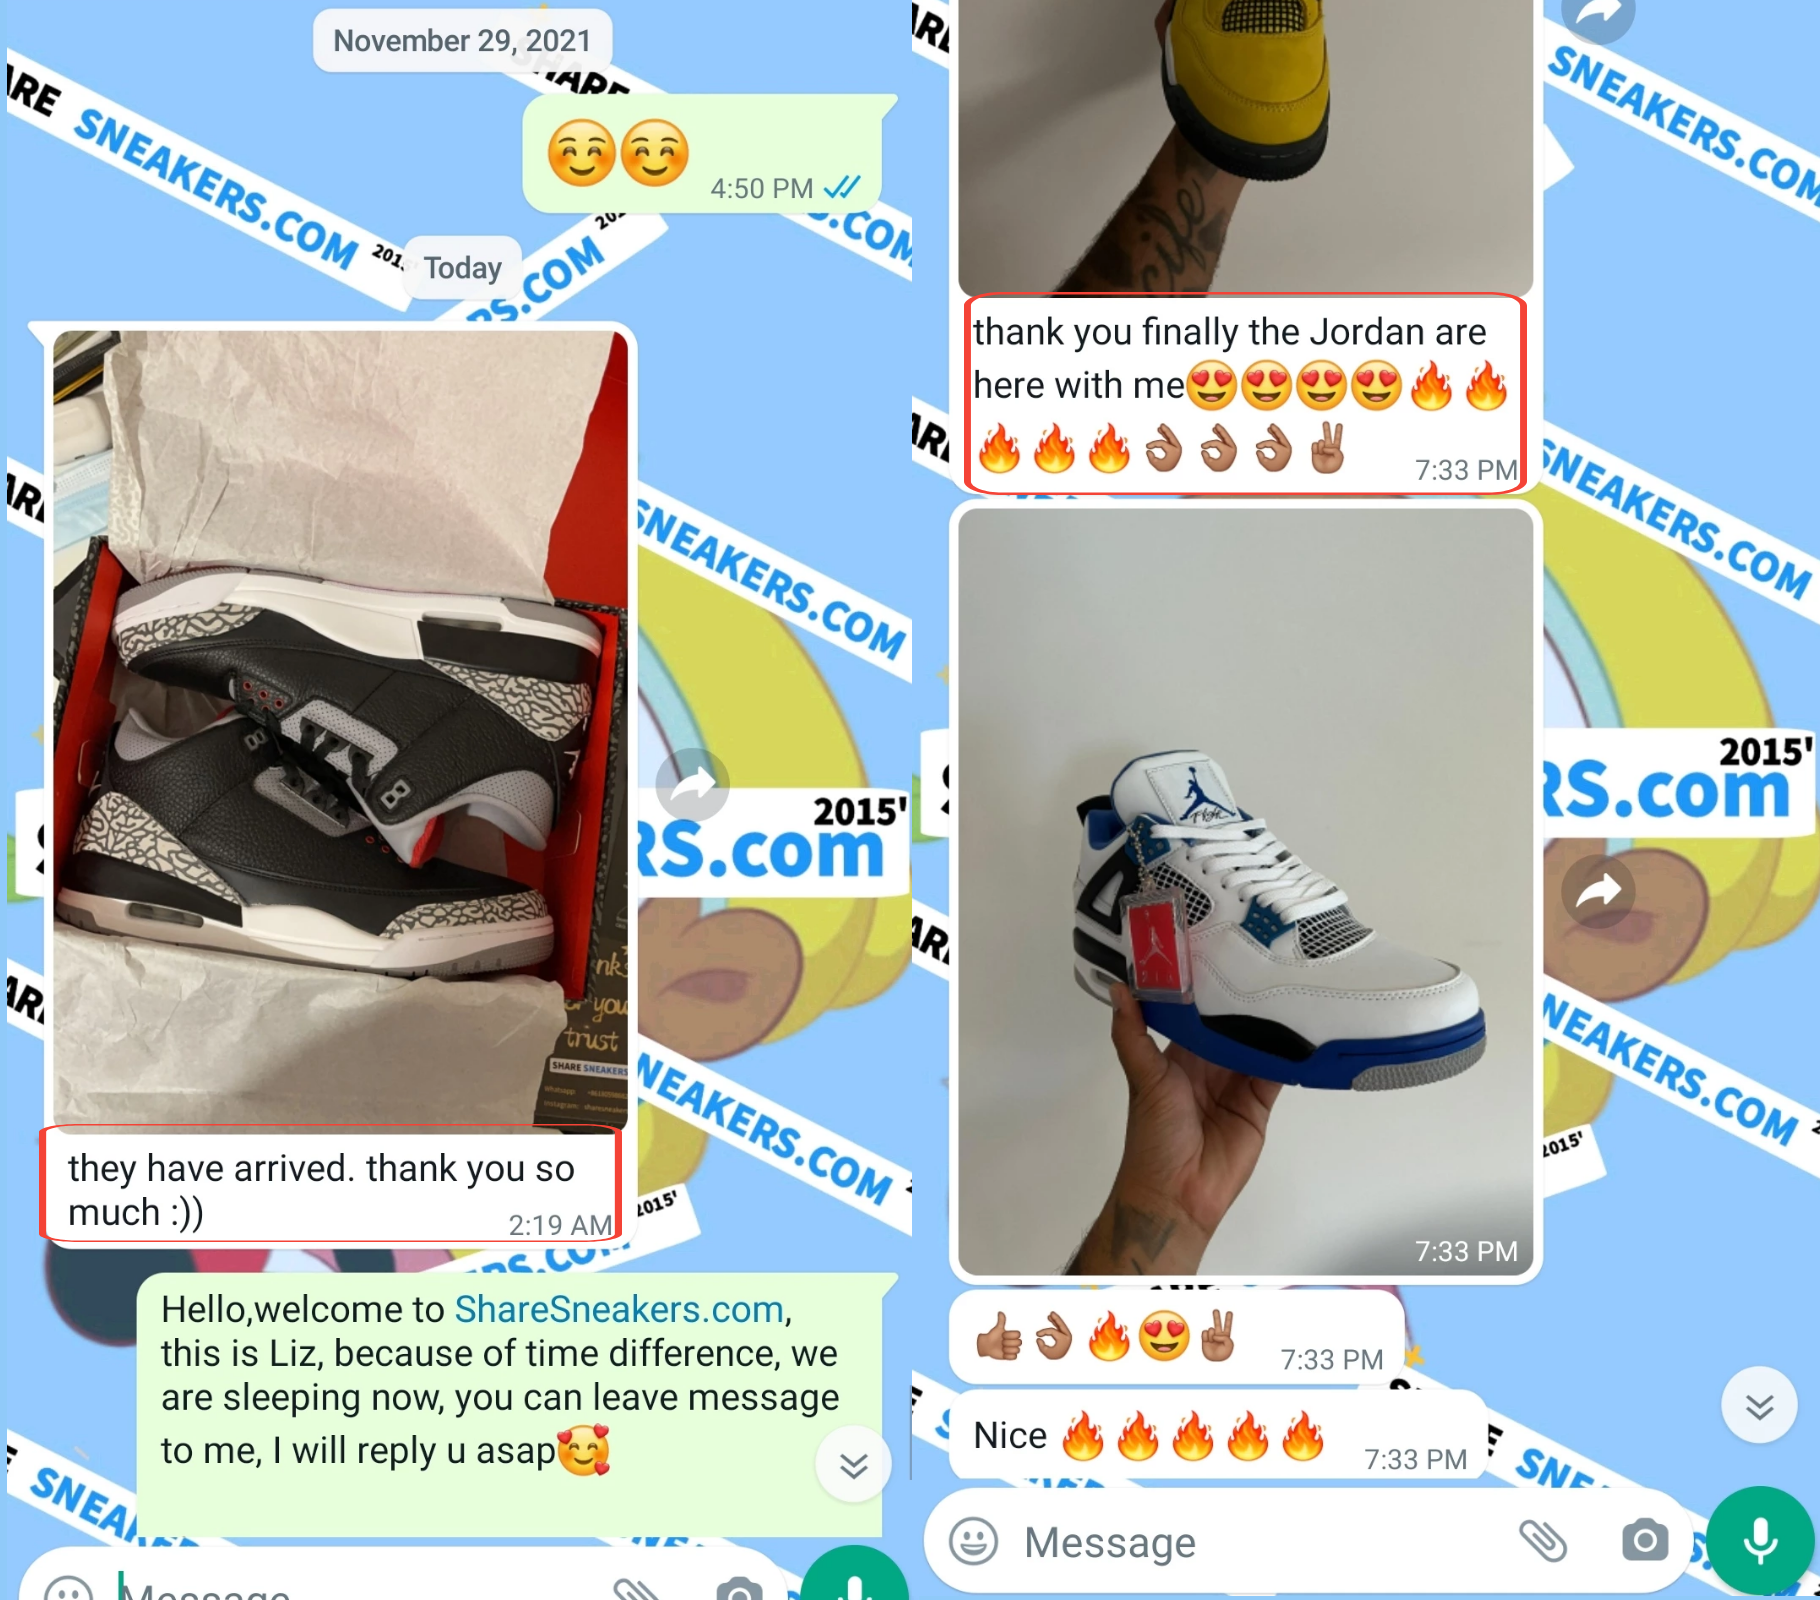 Customer Review for Sharesneakers